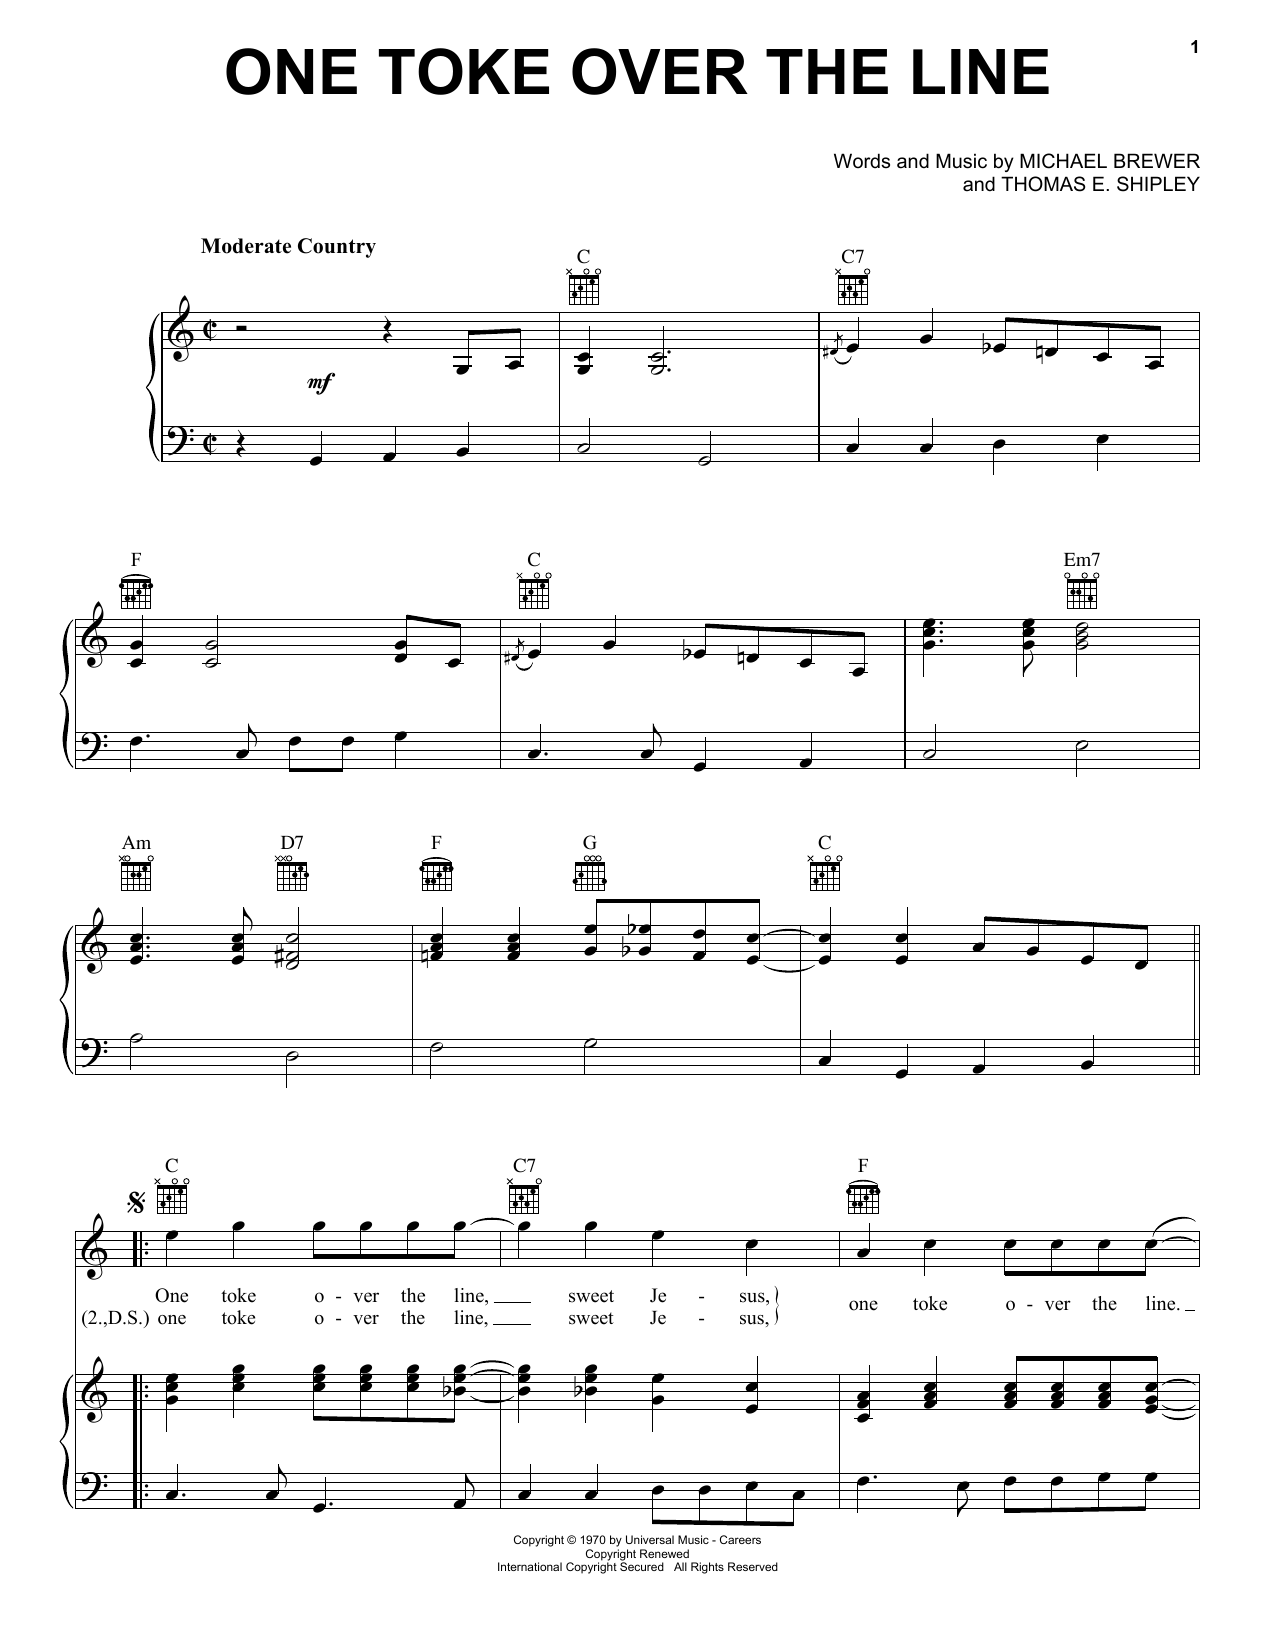 Brewer & Shipley One Toke Over The Line sheet music notes printable PDF score